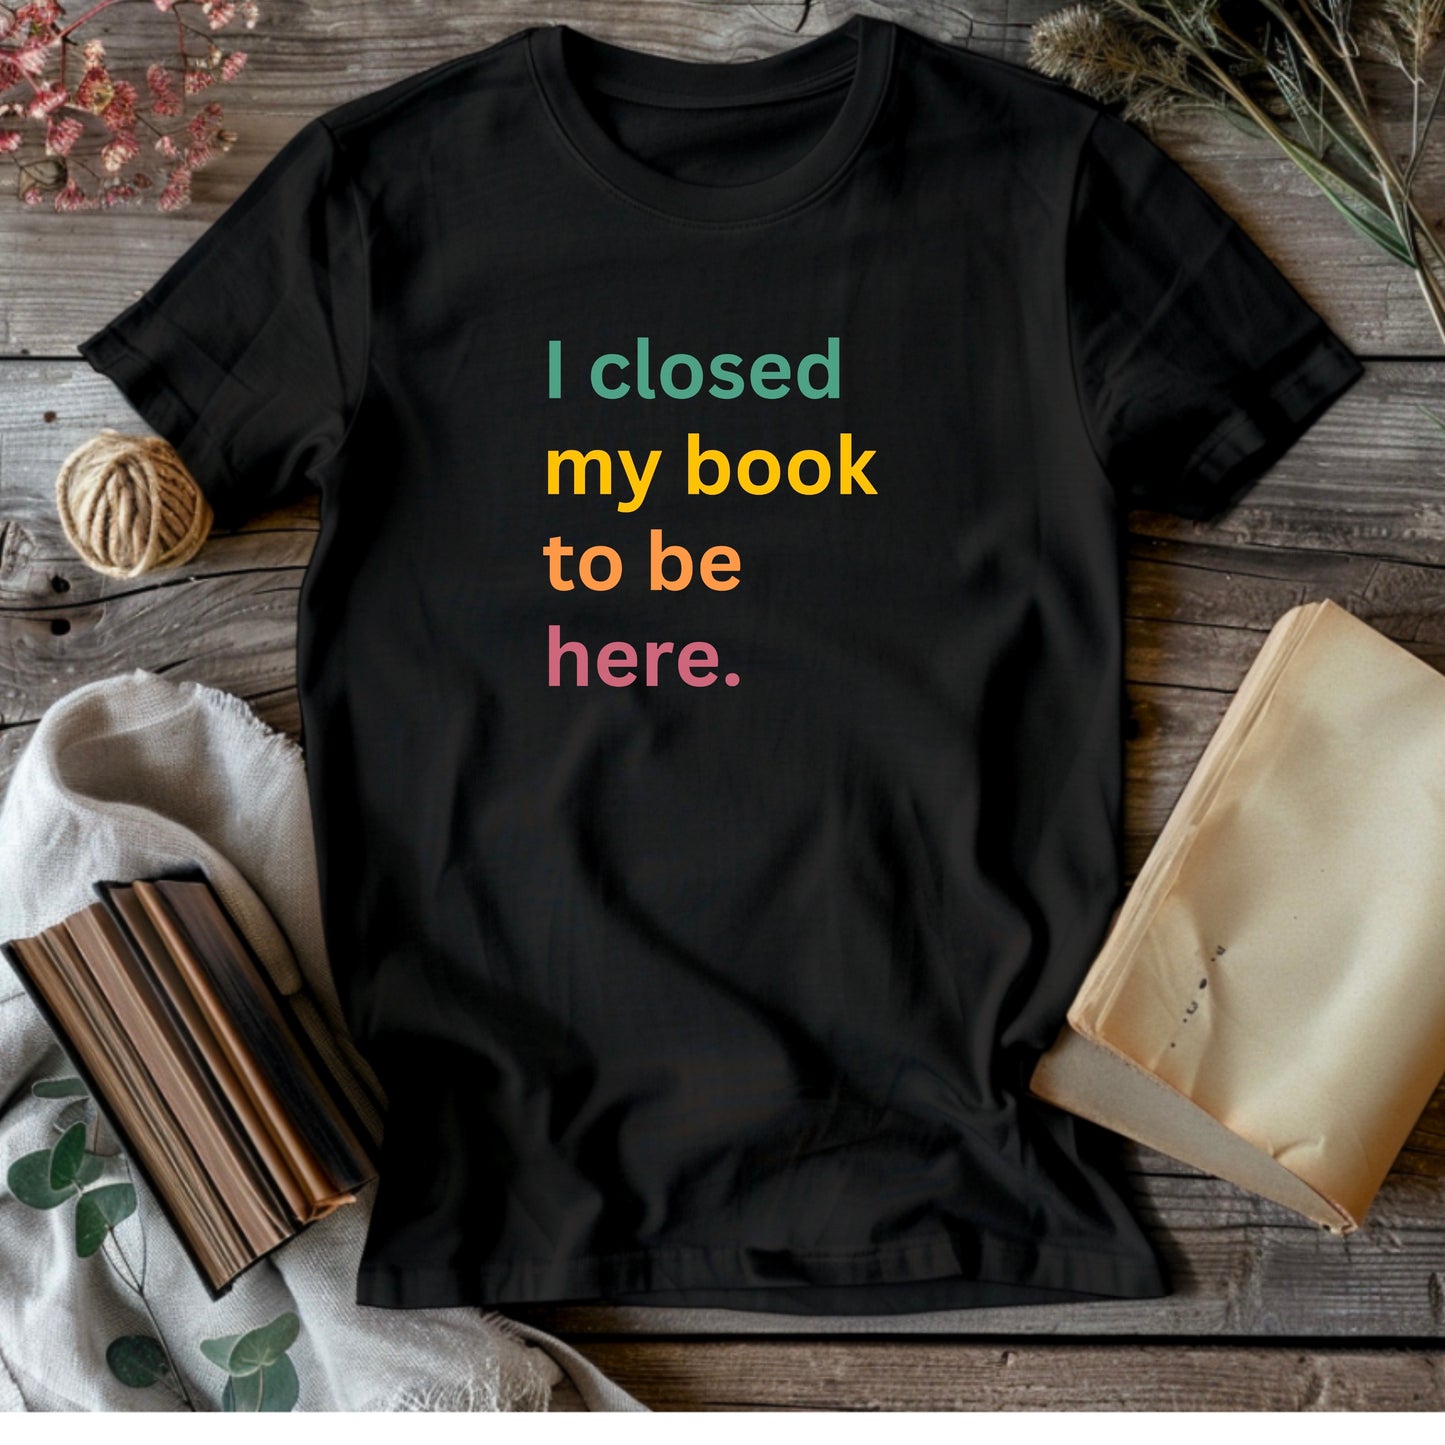 I Closed My Book to be Here, Women's Premium Relaxed T-Shirt